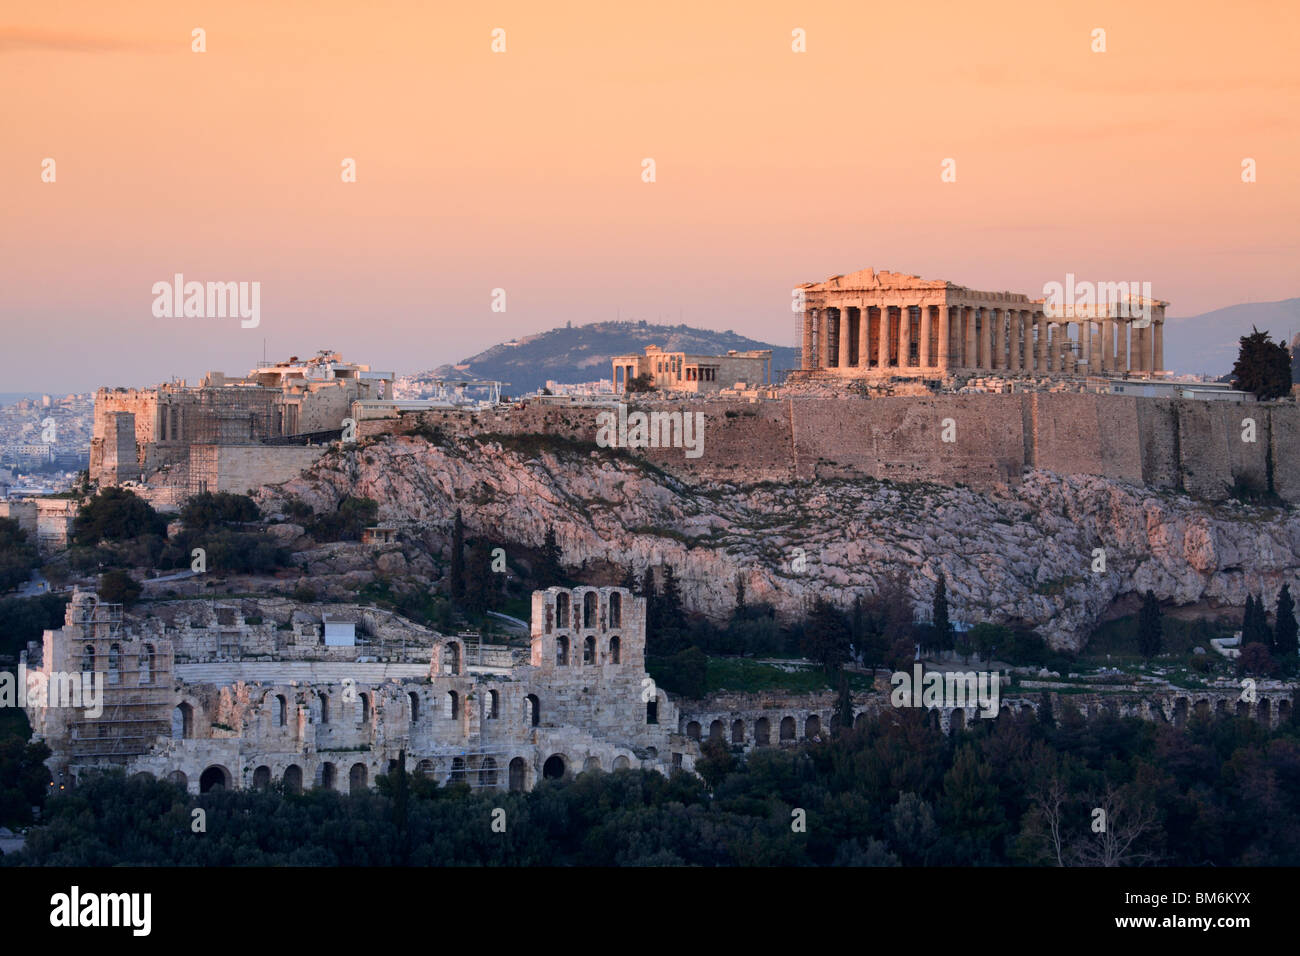 The Parthenon, the Theatre of Dionysus and the Acropolis, Athens, Greece Stock Photo